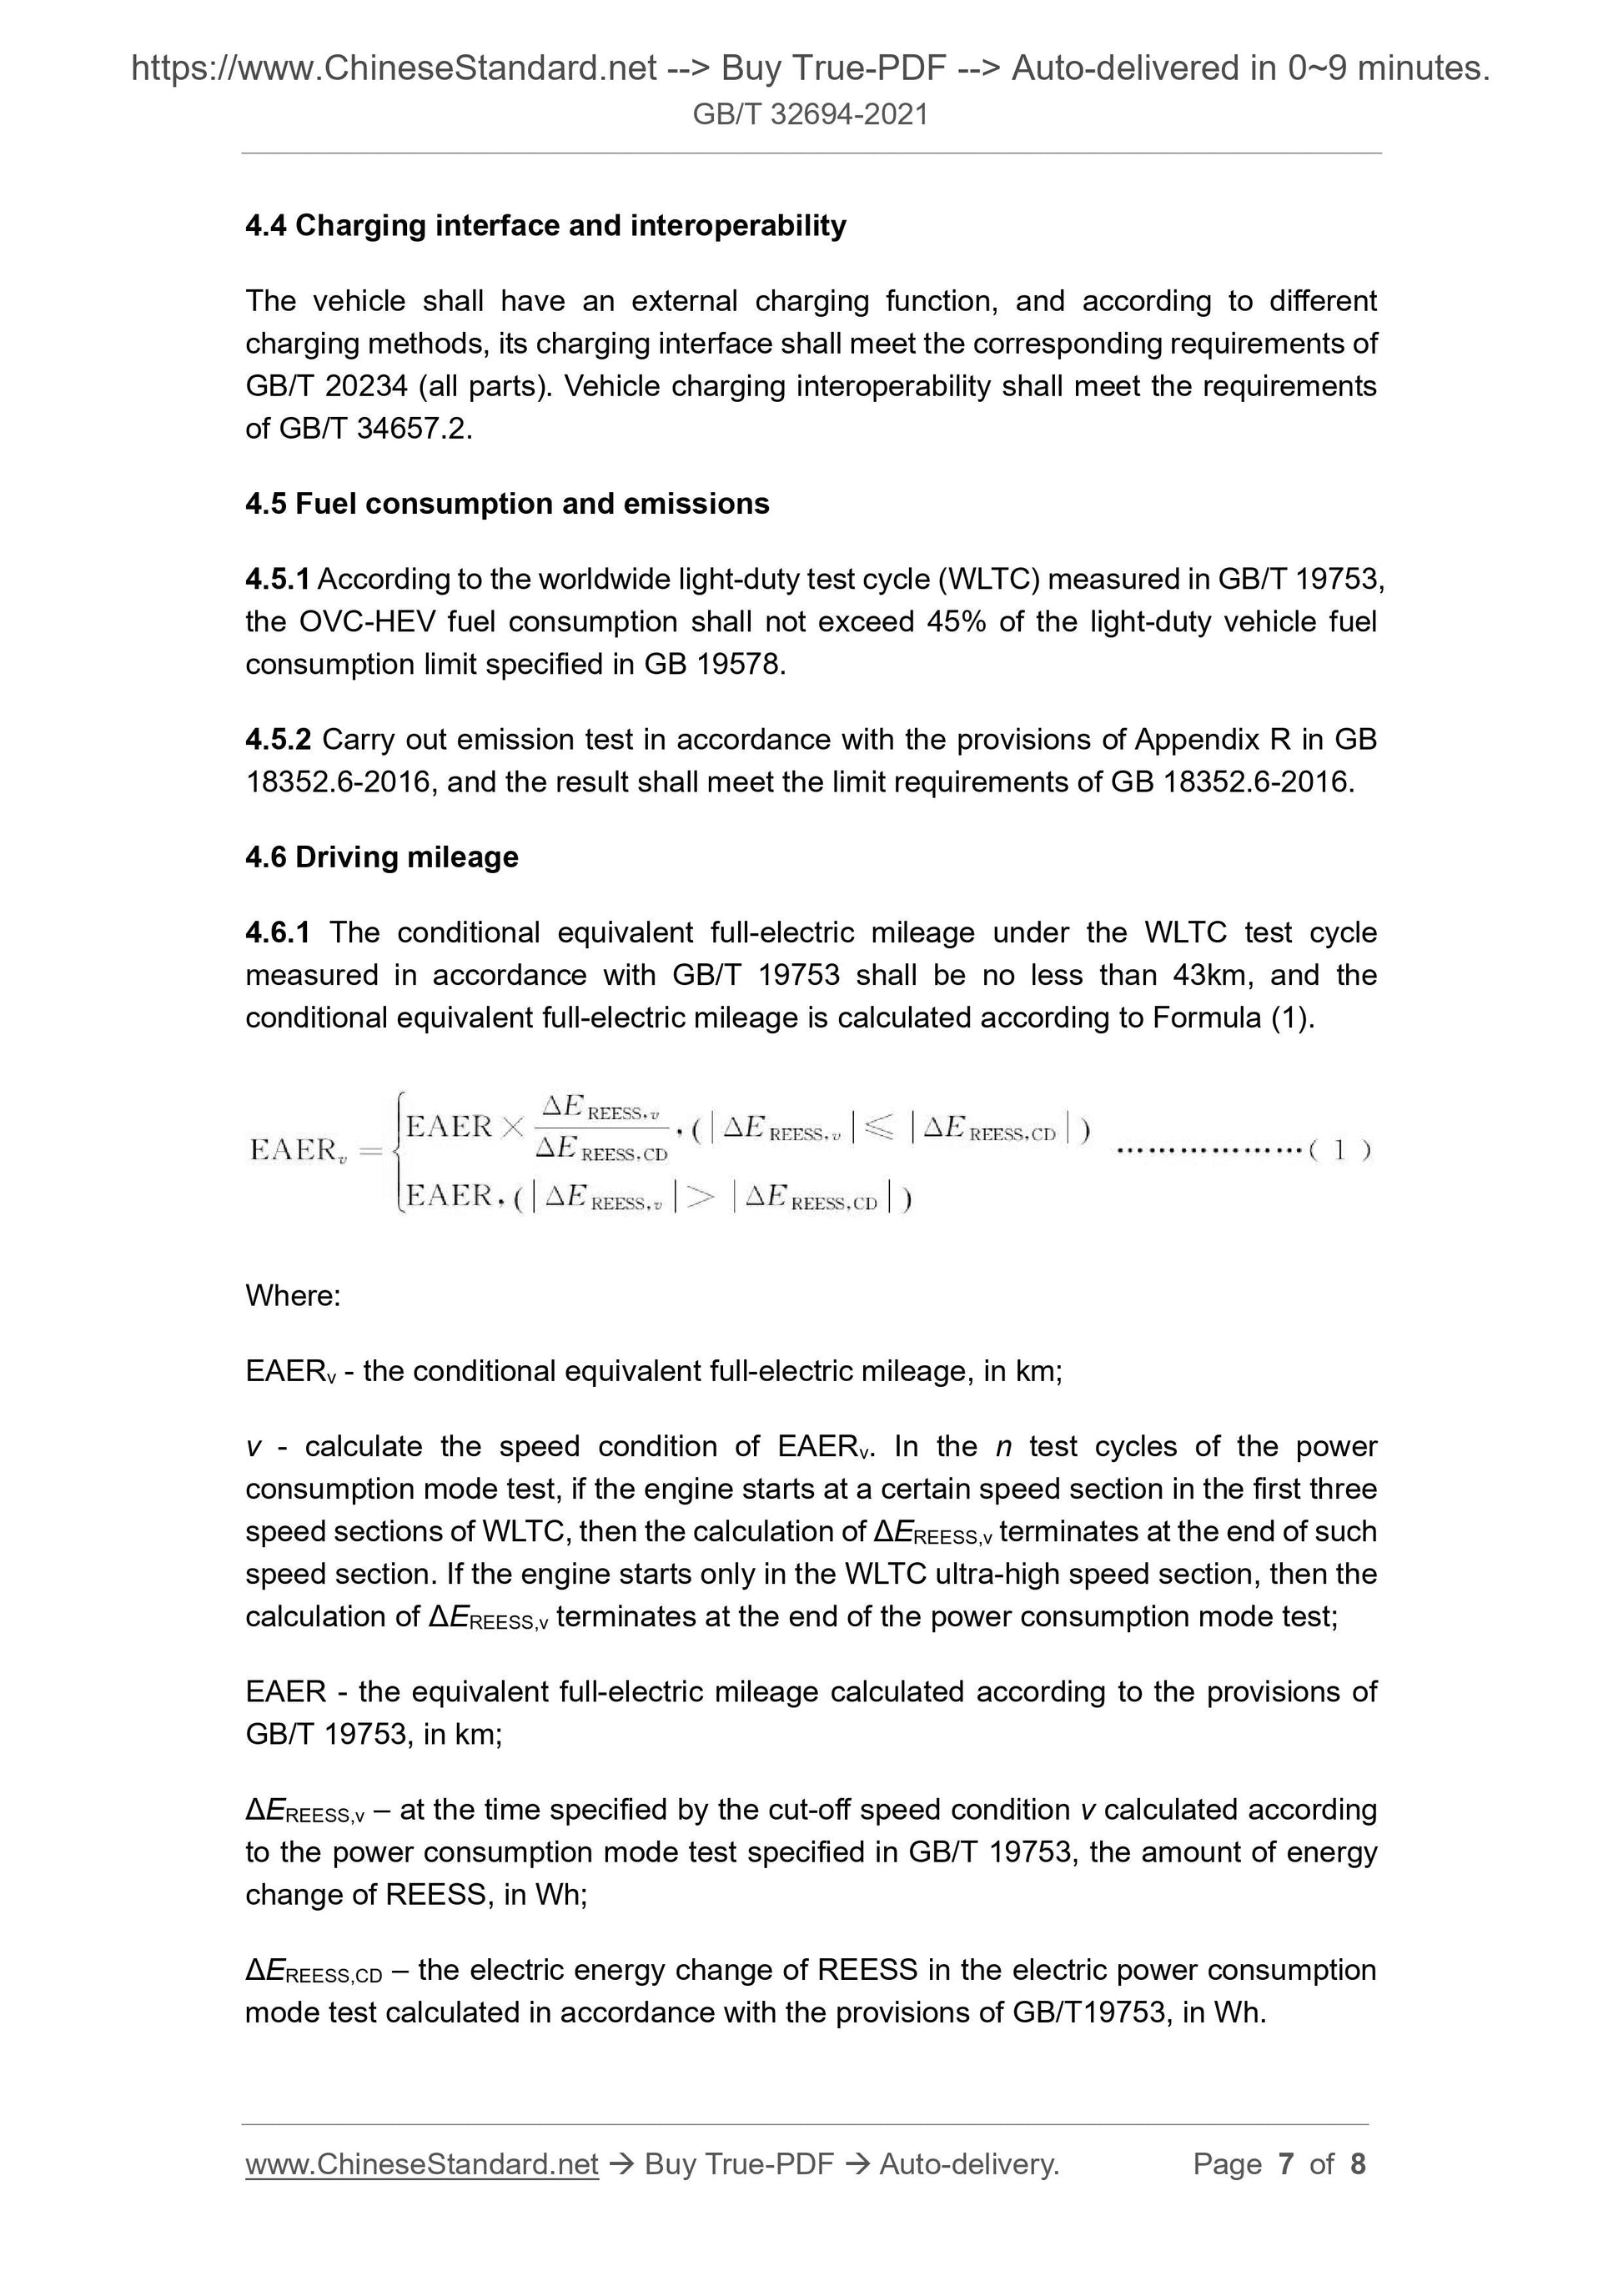 GB/T 32694-2021 Page 4